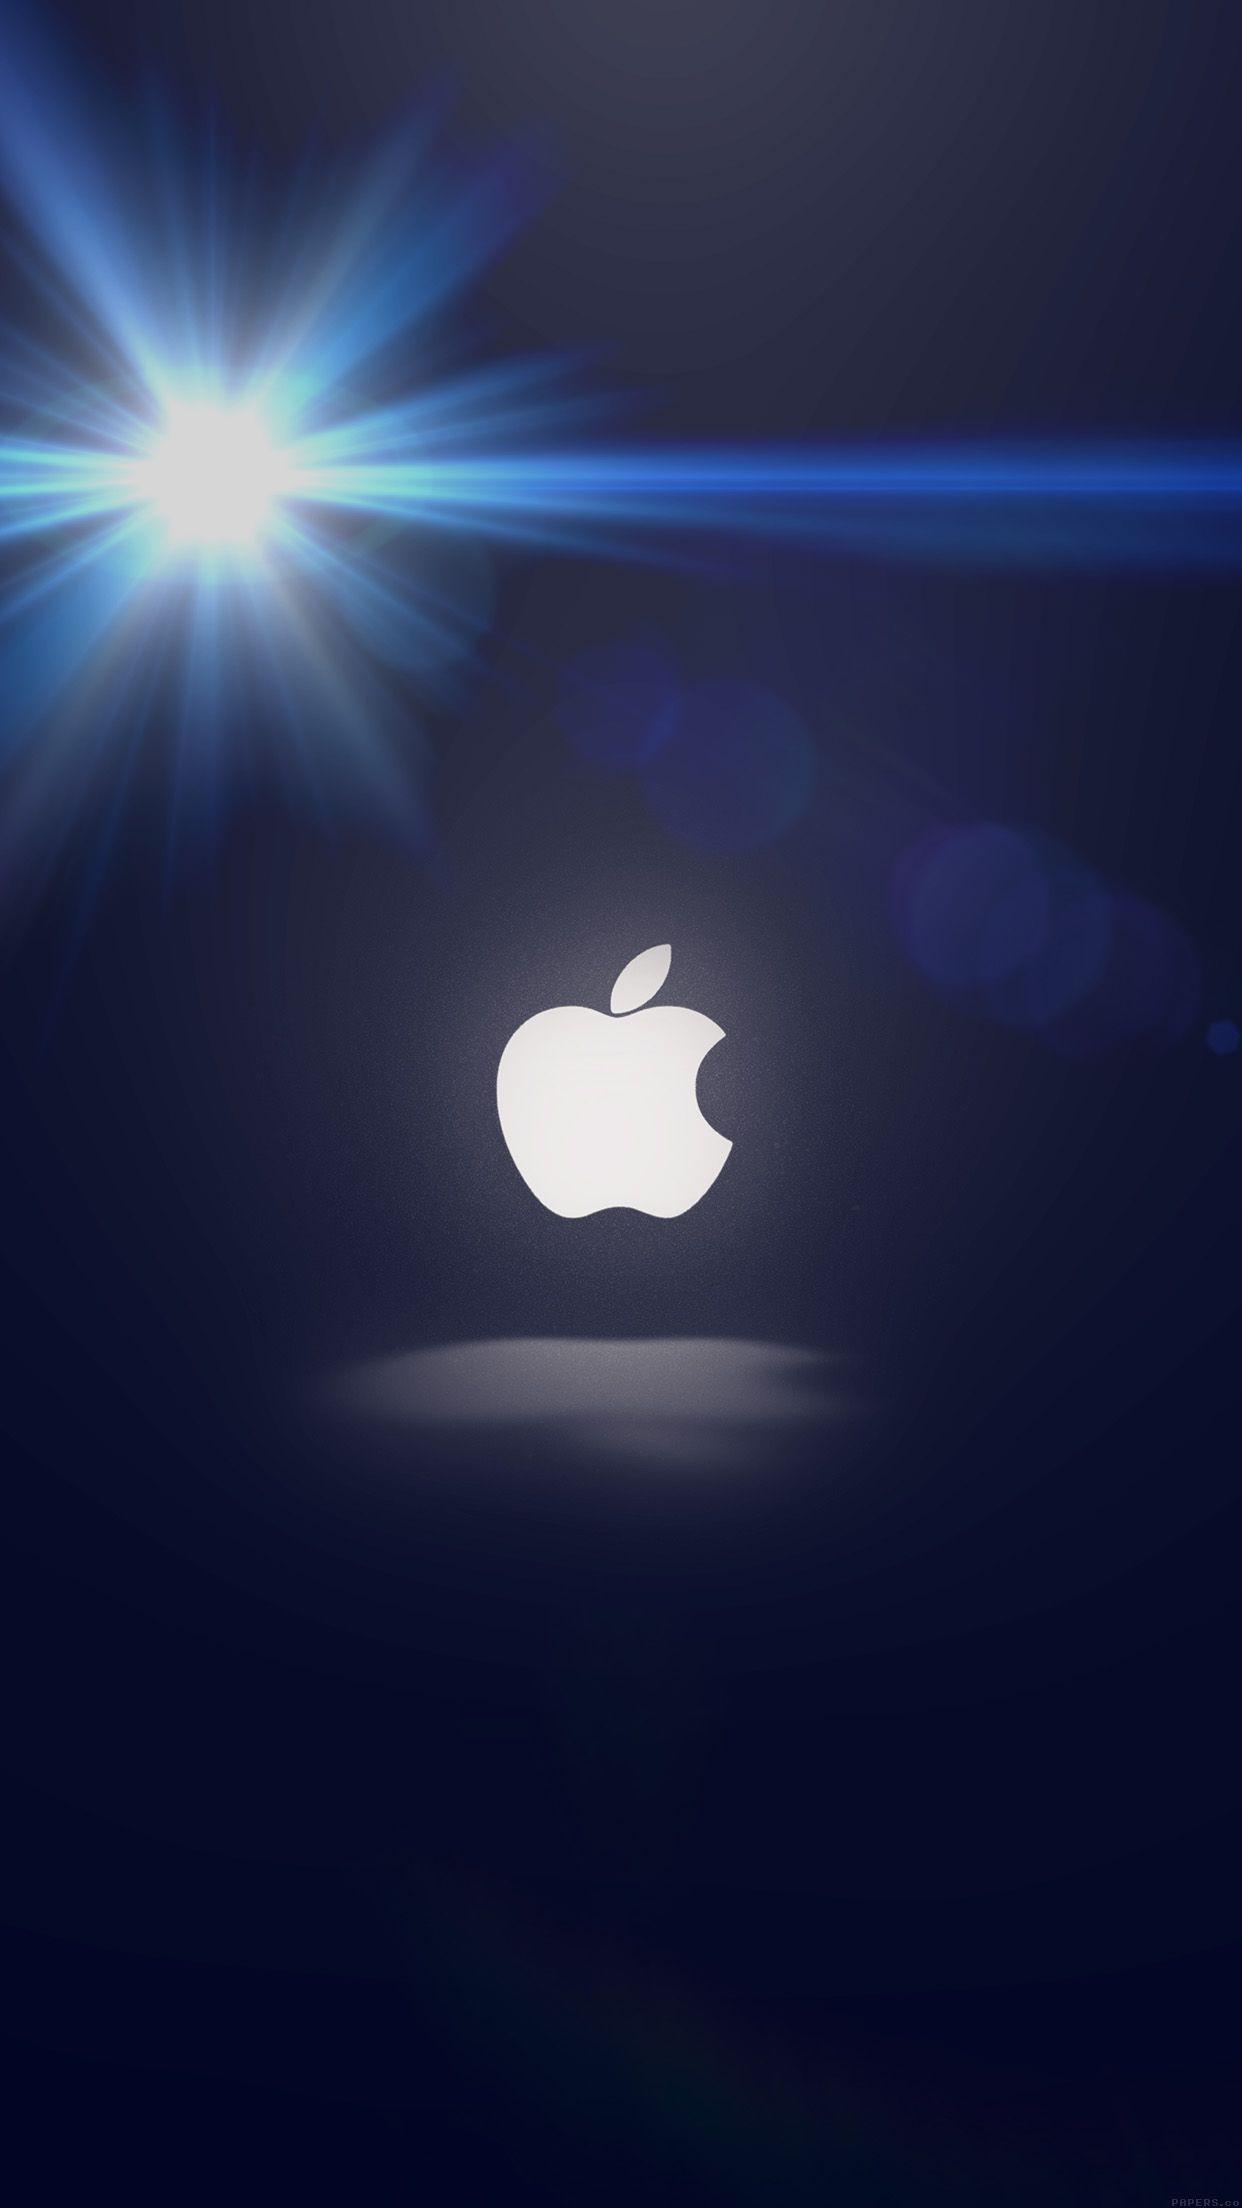 B in Apple Logo - Apple Logo Love Mania Flare Android wallpaper - Android HD wallpapers